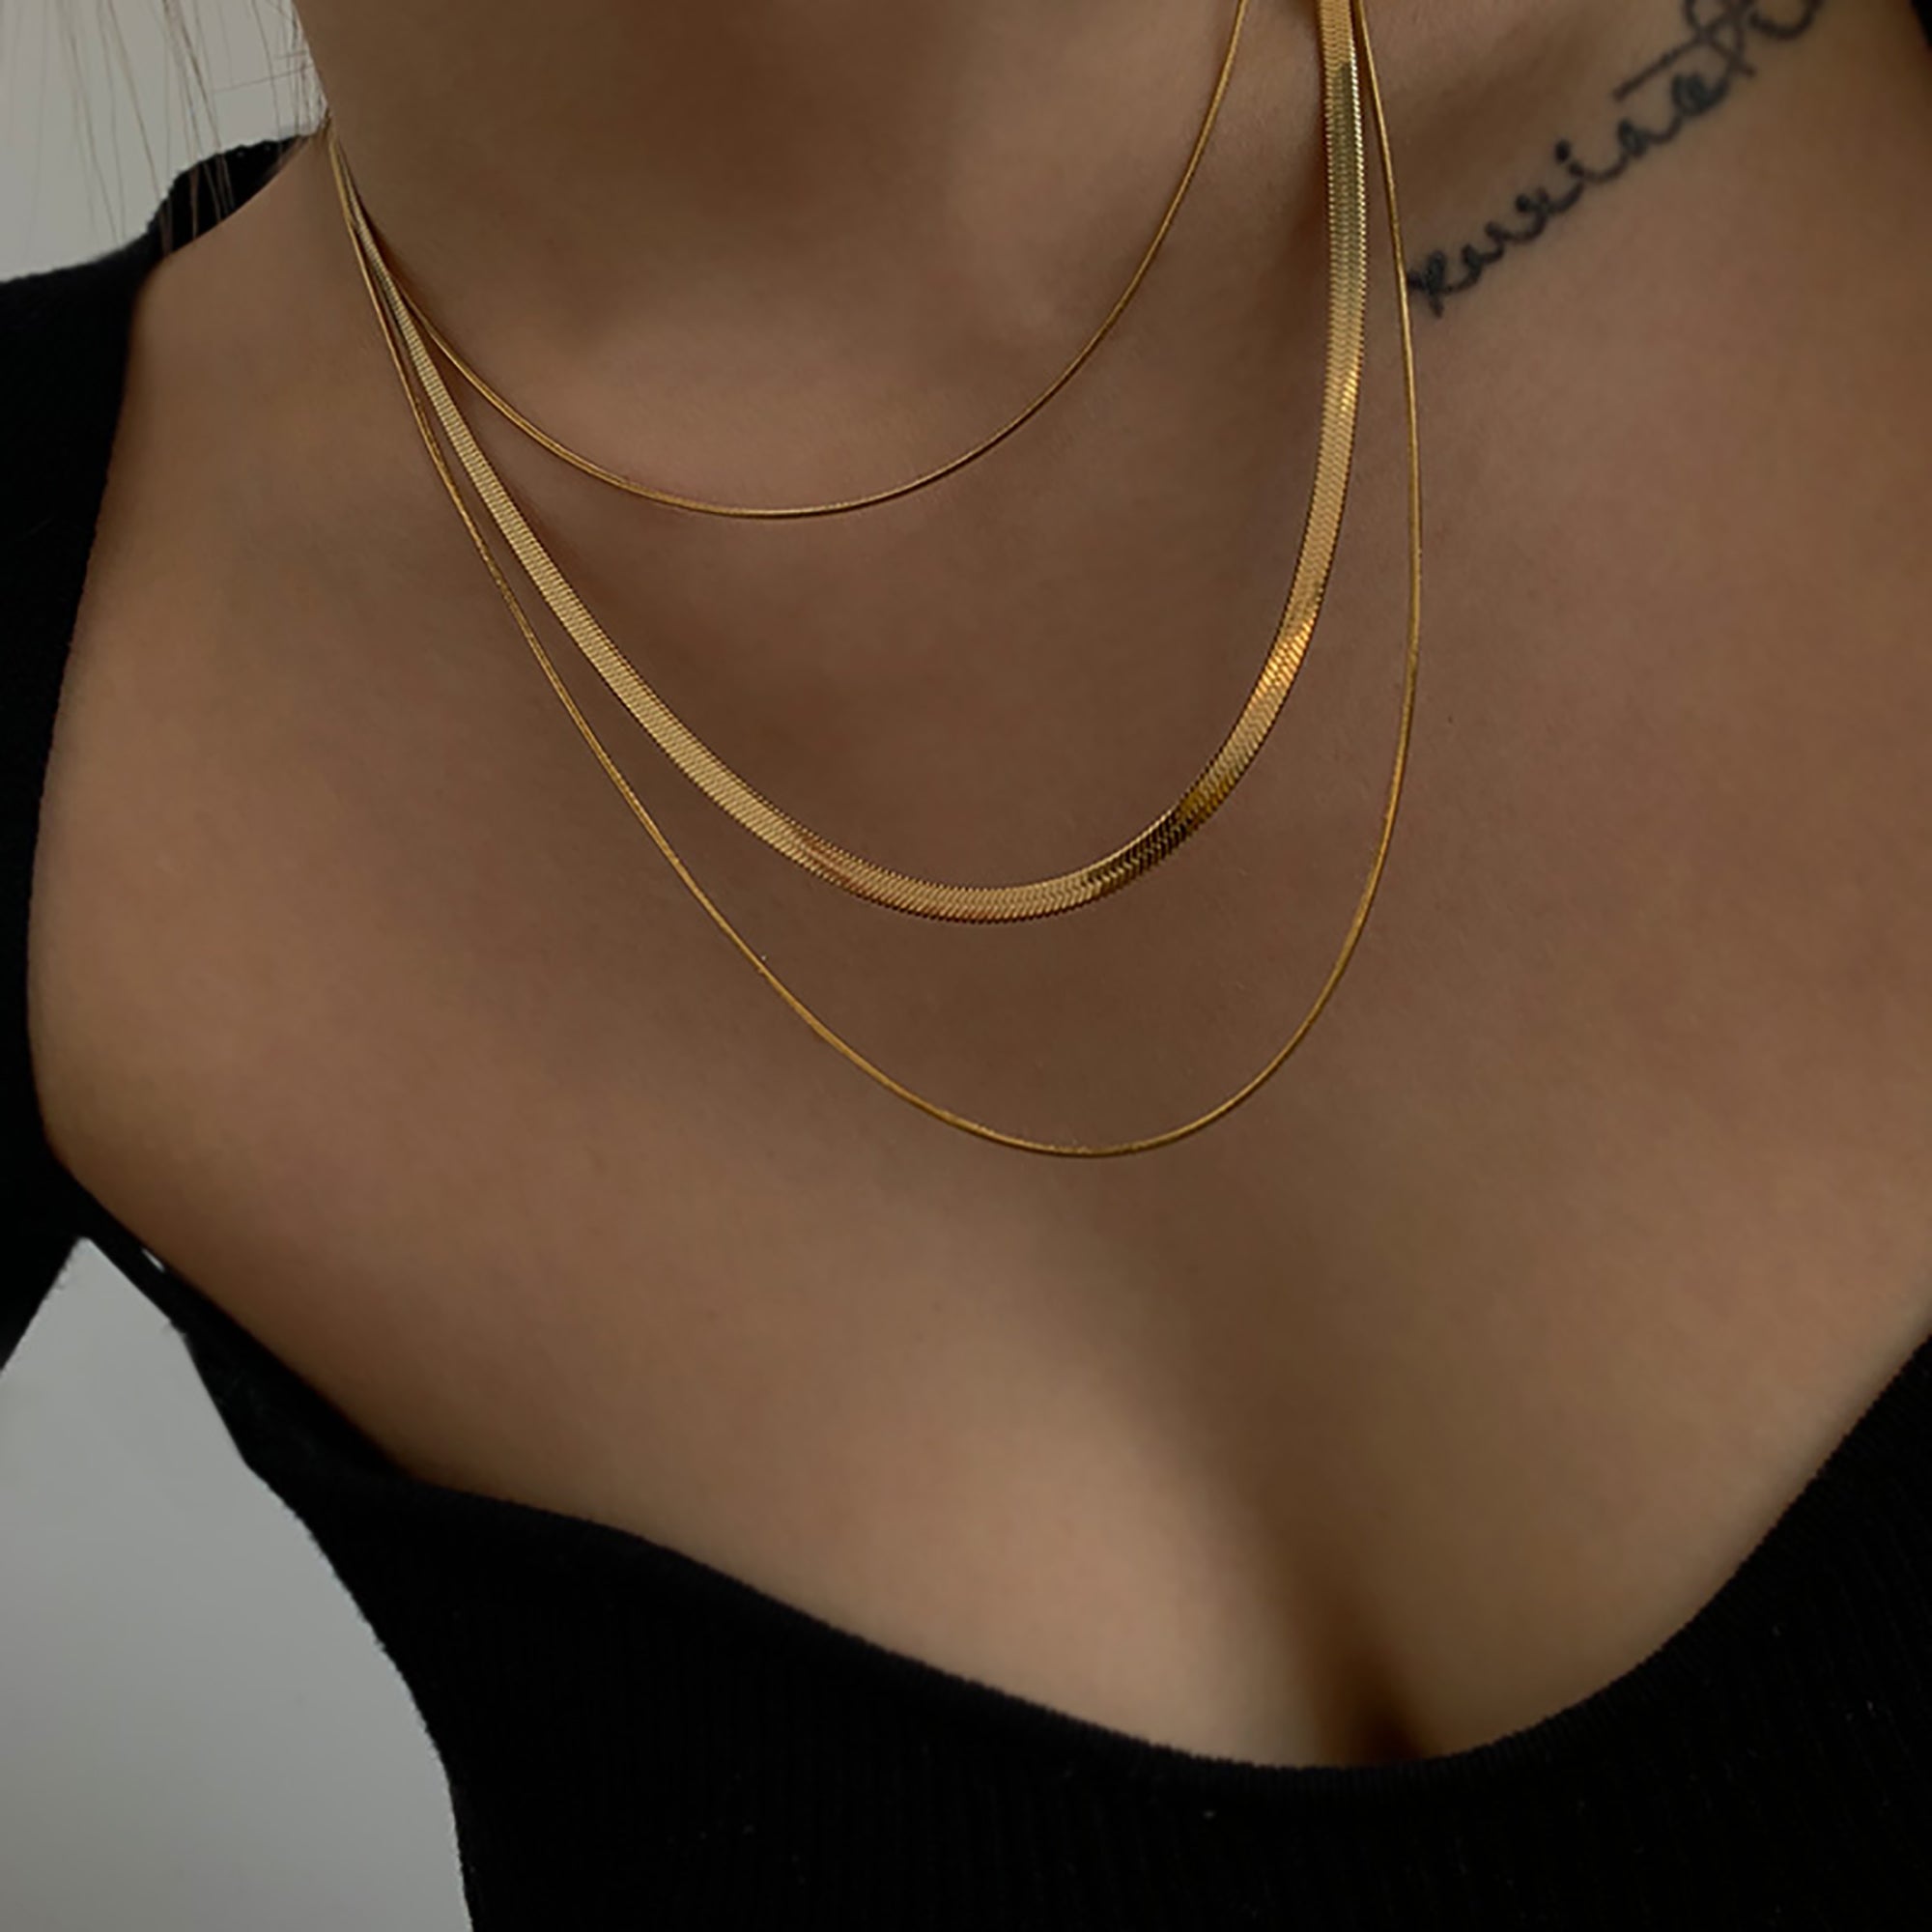 Gold Plated Layered Metal Chain Necklace Gift wedding influencer styling KOL / Youtuber / Celebrity / Fashion Icon picked